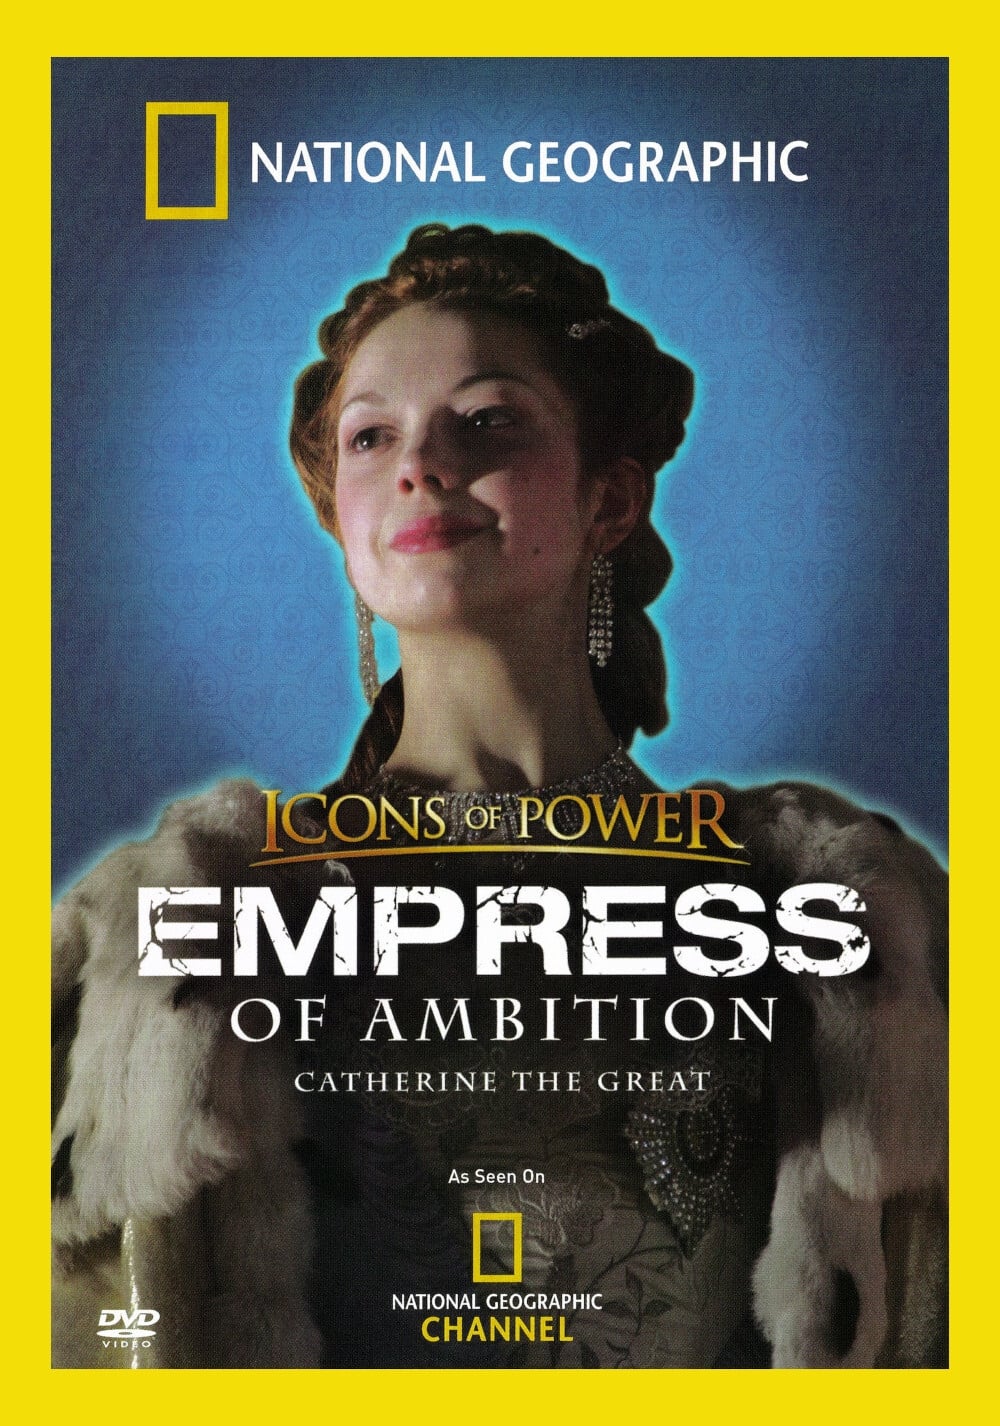 Empress of Ambition: Catherine the Great